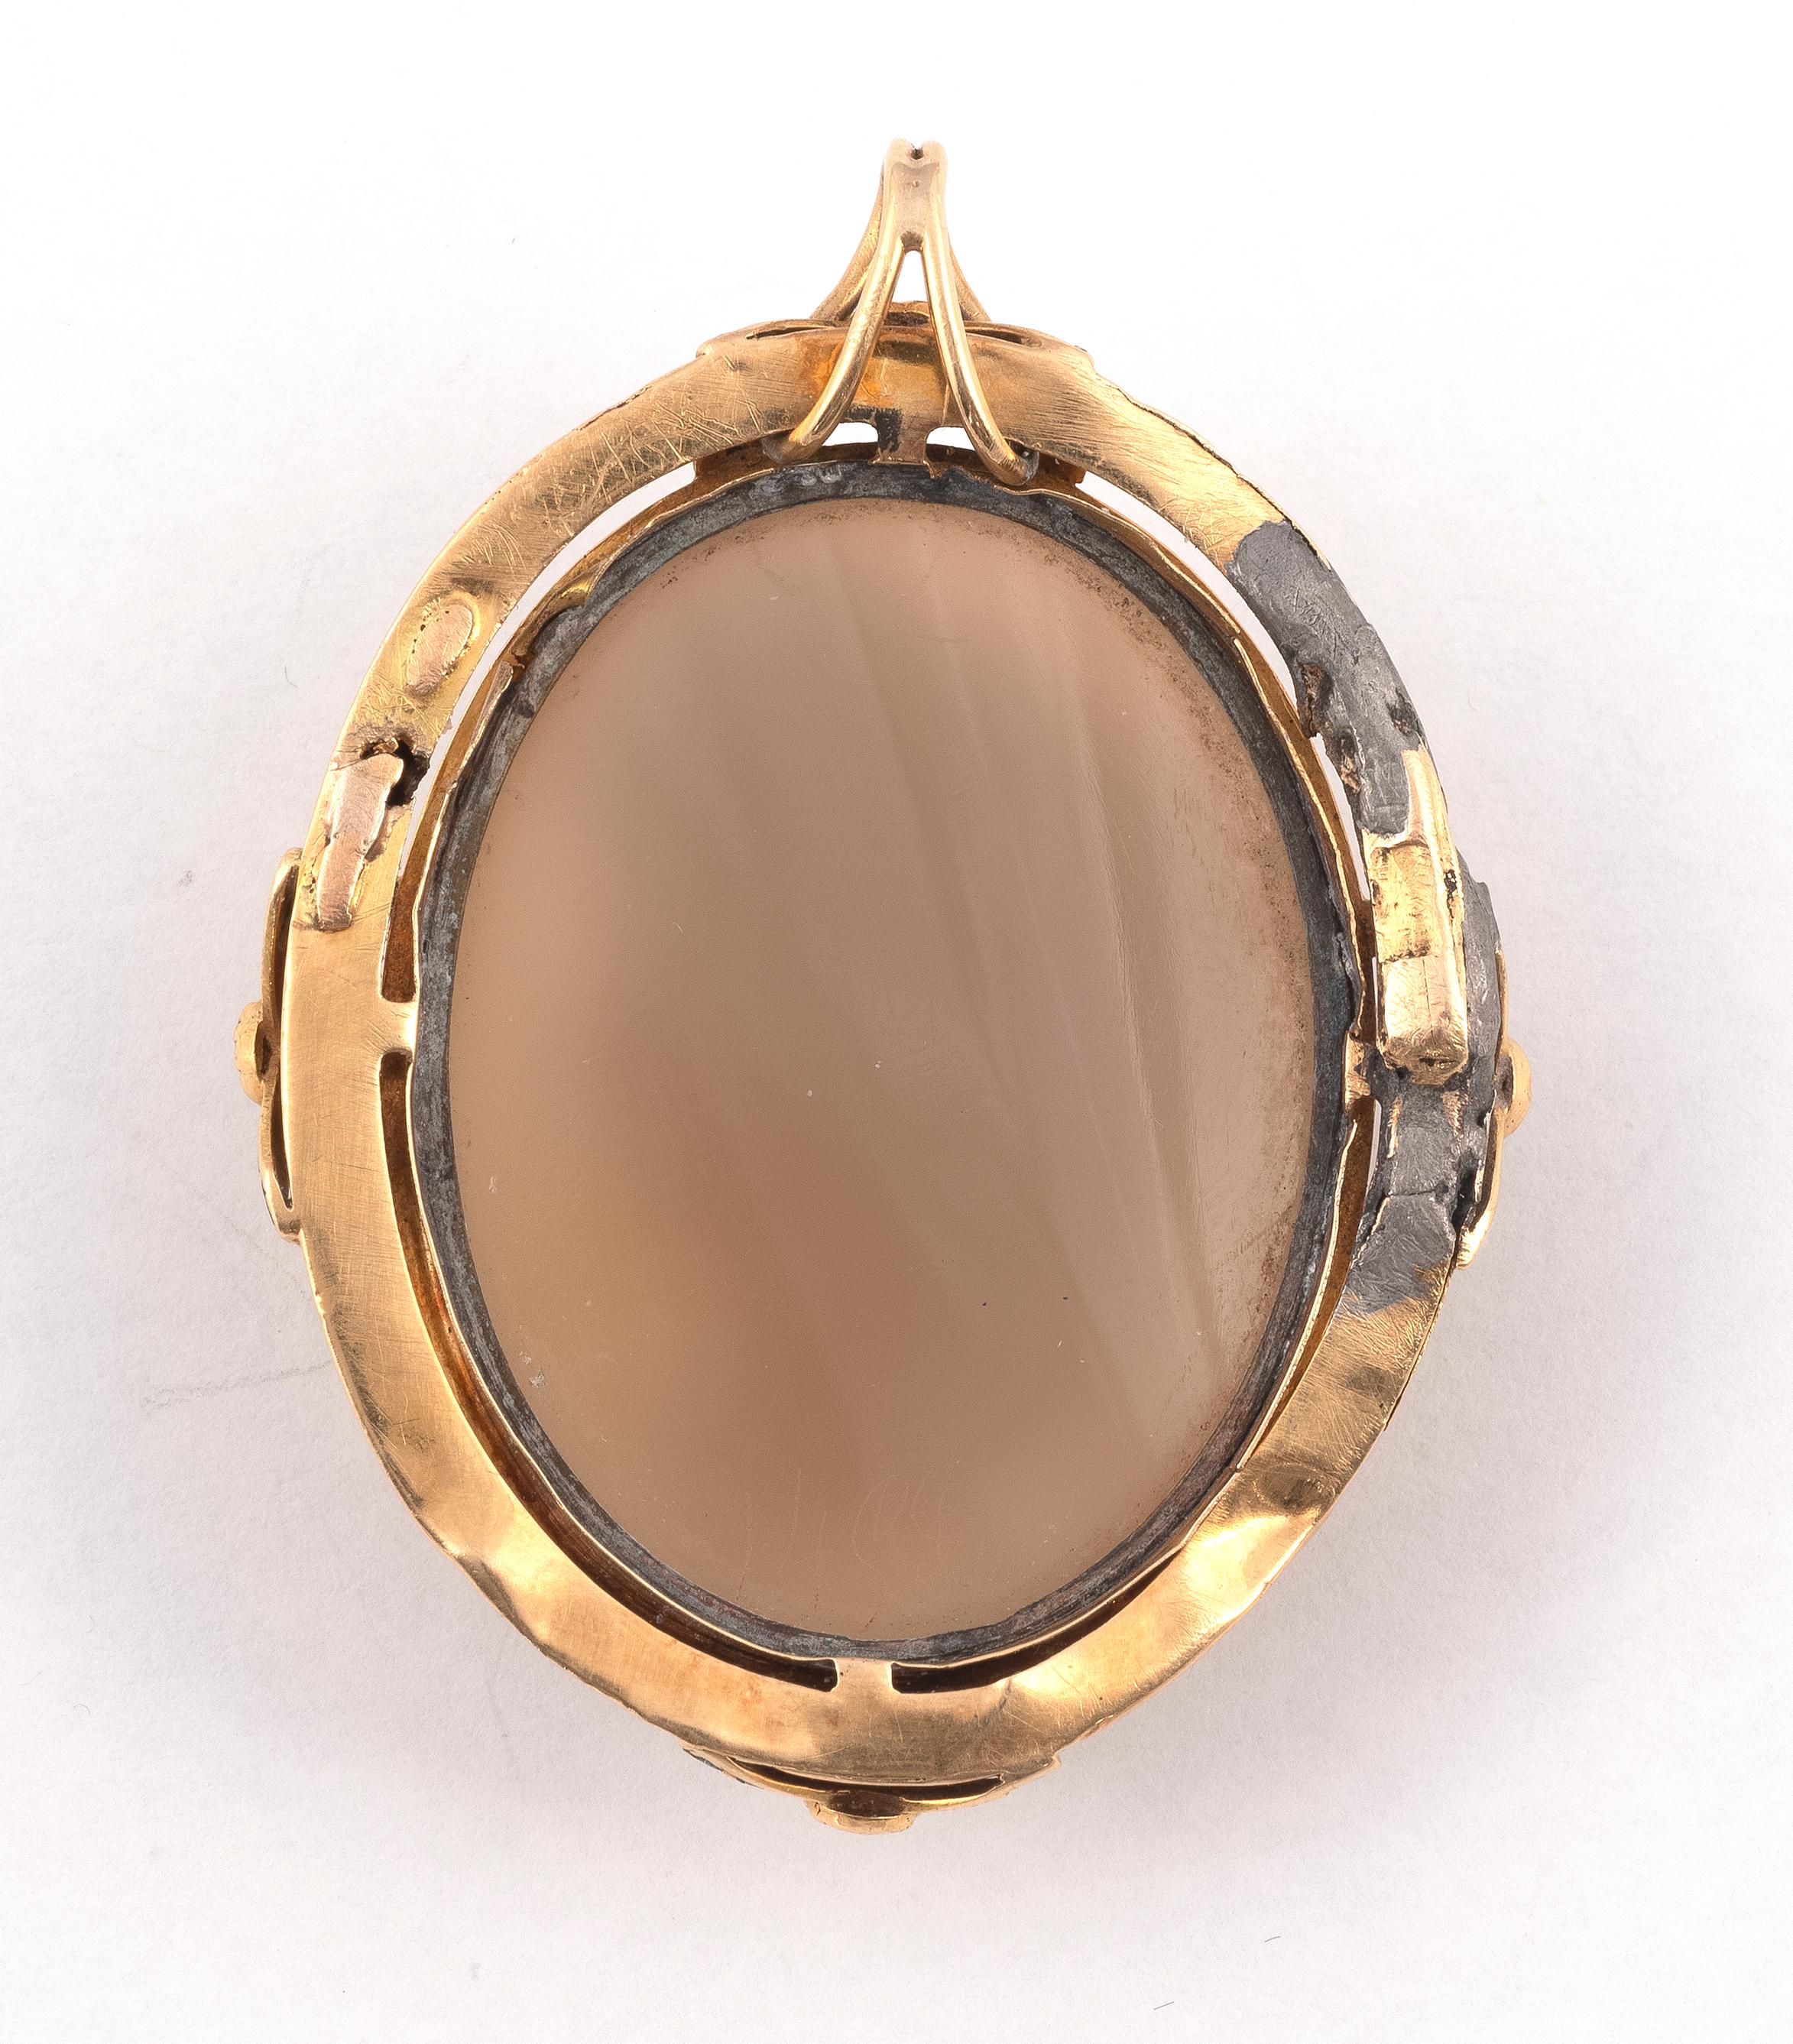 PENDANT CAMEO, the setting in 750 / °° yellow gold braided and chiseled decorated with foliage and black enamel punctuated with cultured pearls surrounding a woman in profile on agate, her hair richly chiseled and styled in the antique style. End of